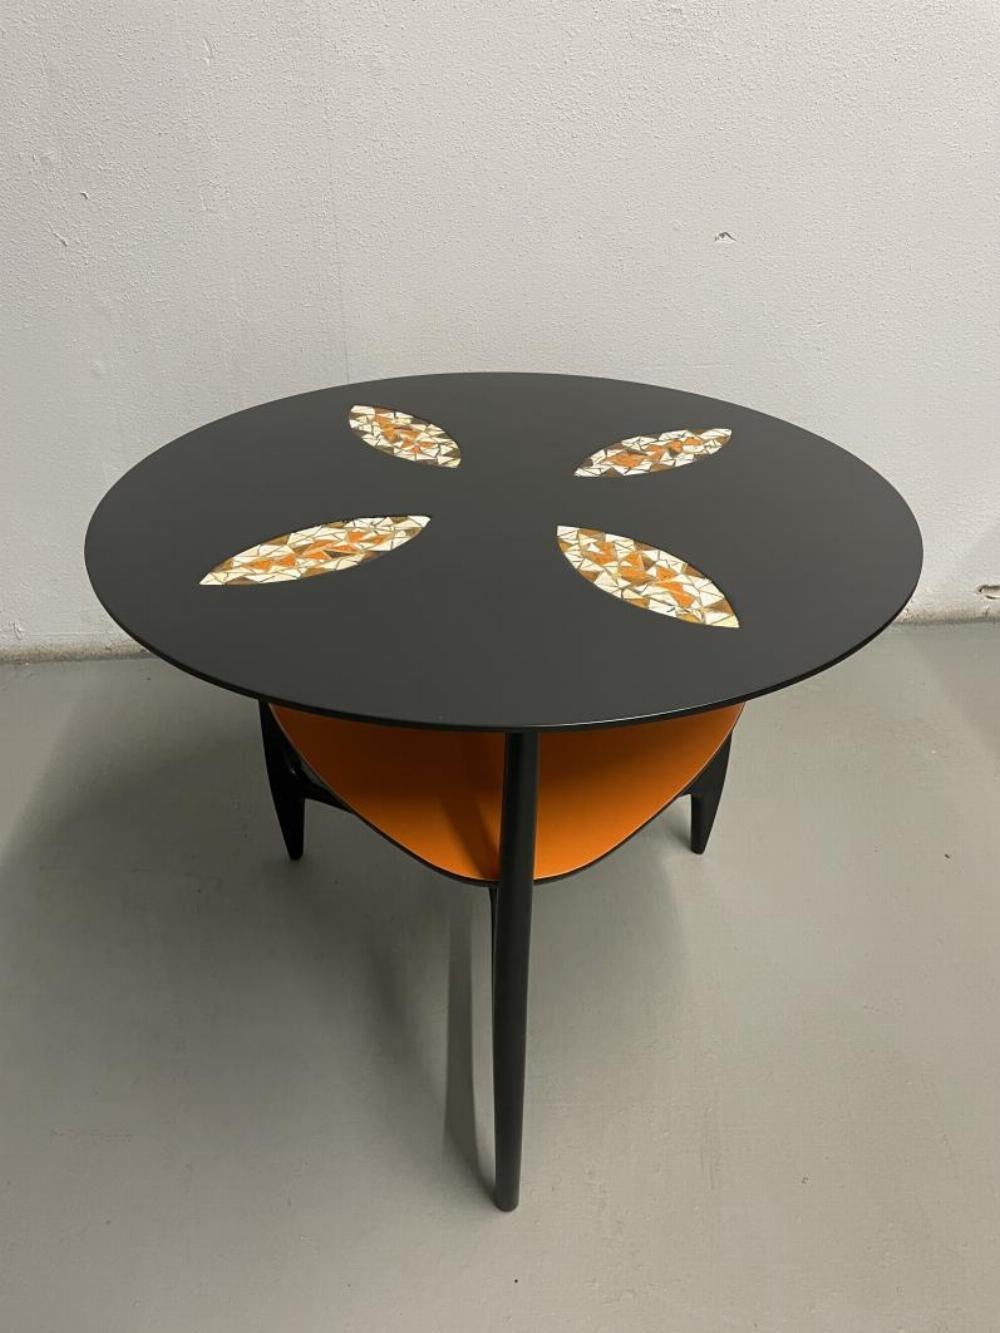 Mid Century side table with Vintage Hand Painted Tile Inset. Ebonized wood and orange Lacquer. 1960's.